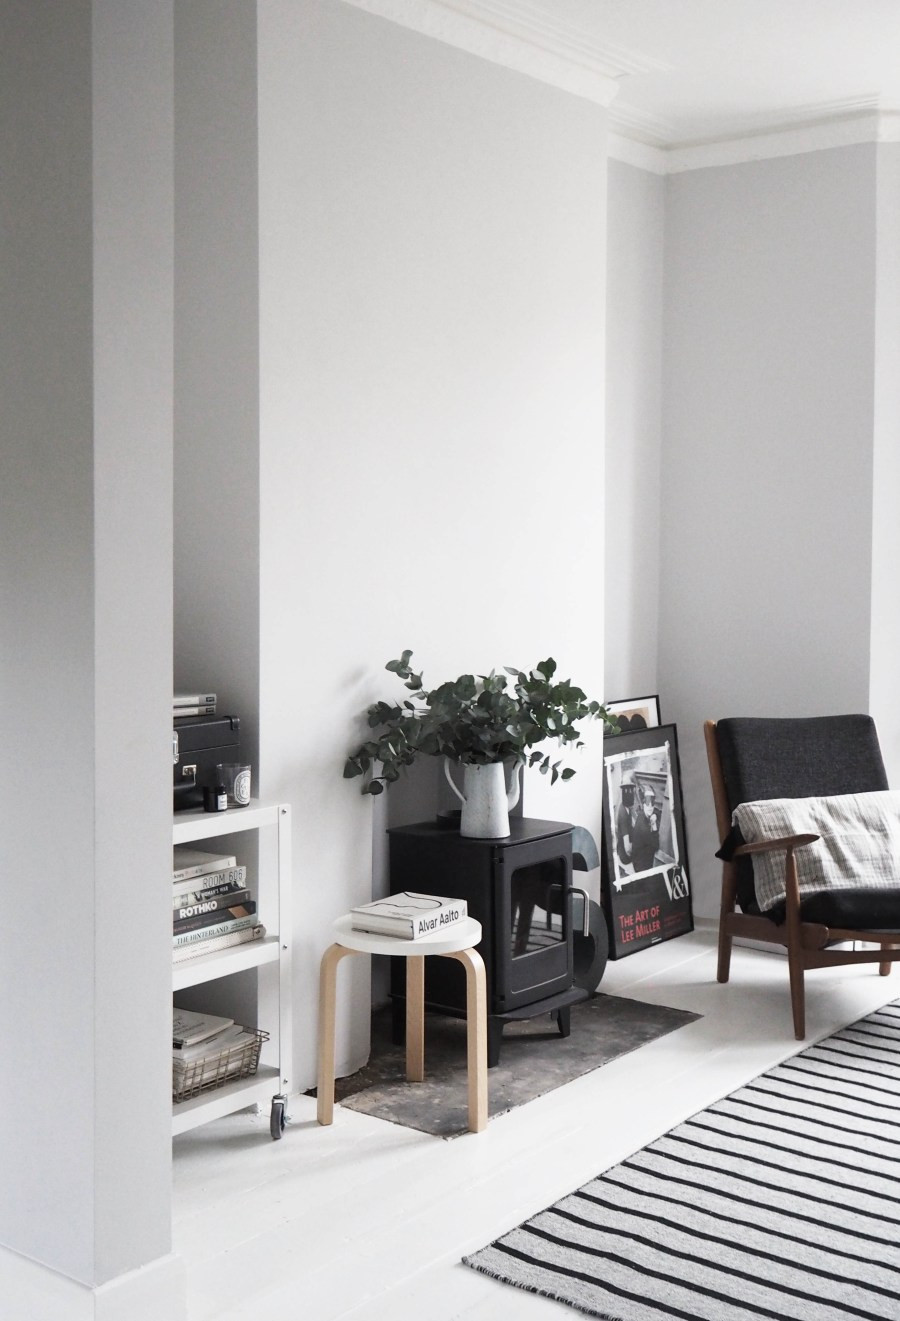 Light Grey Walls Living Room
 My Scandi style living room makeover – painted white